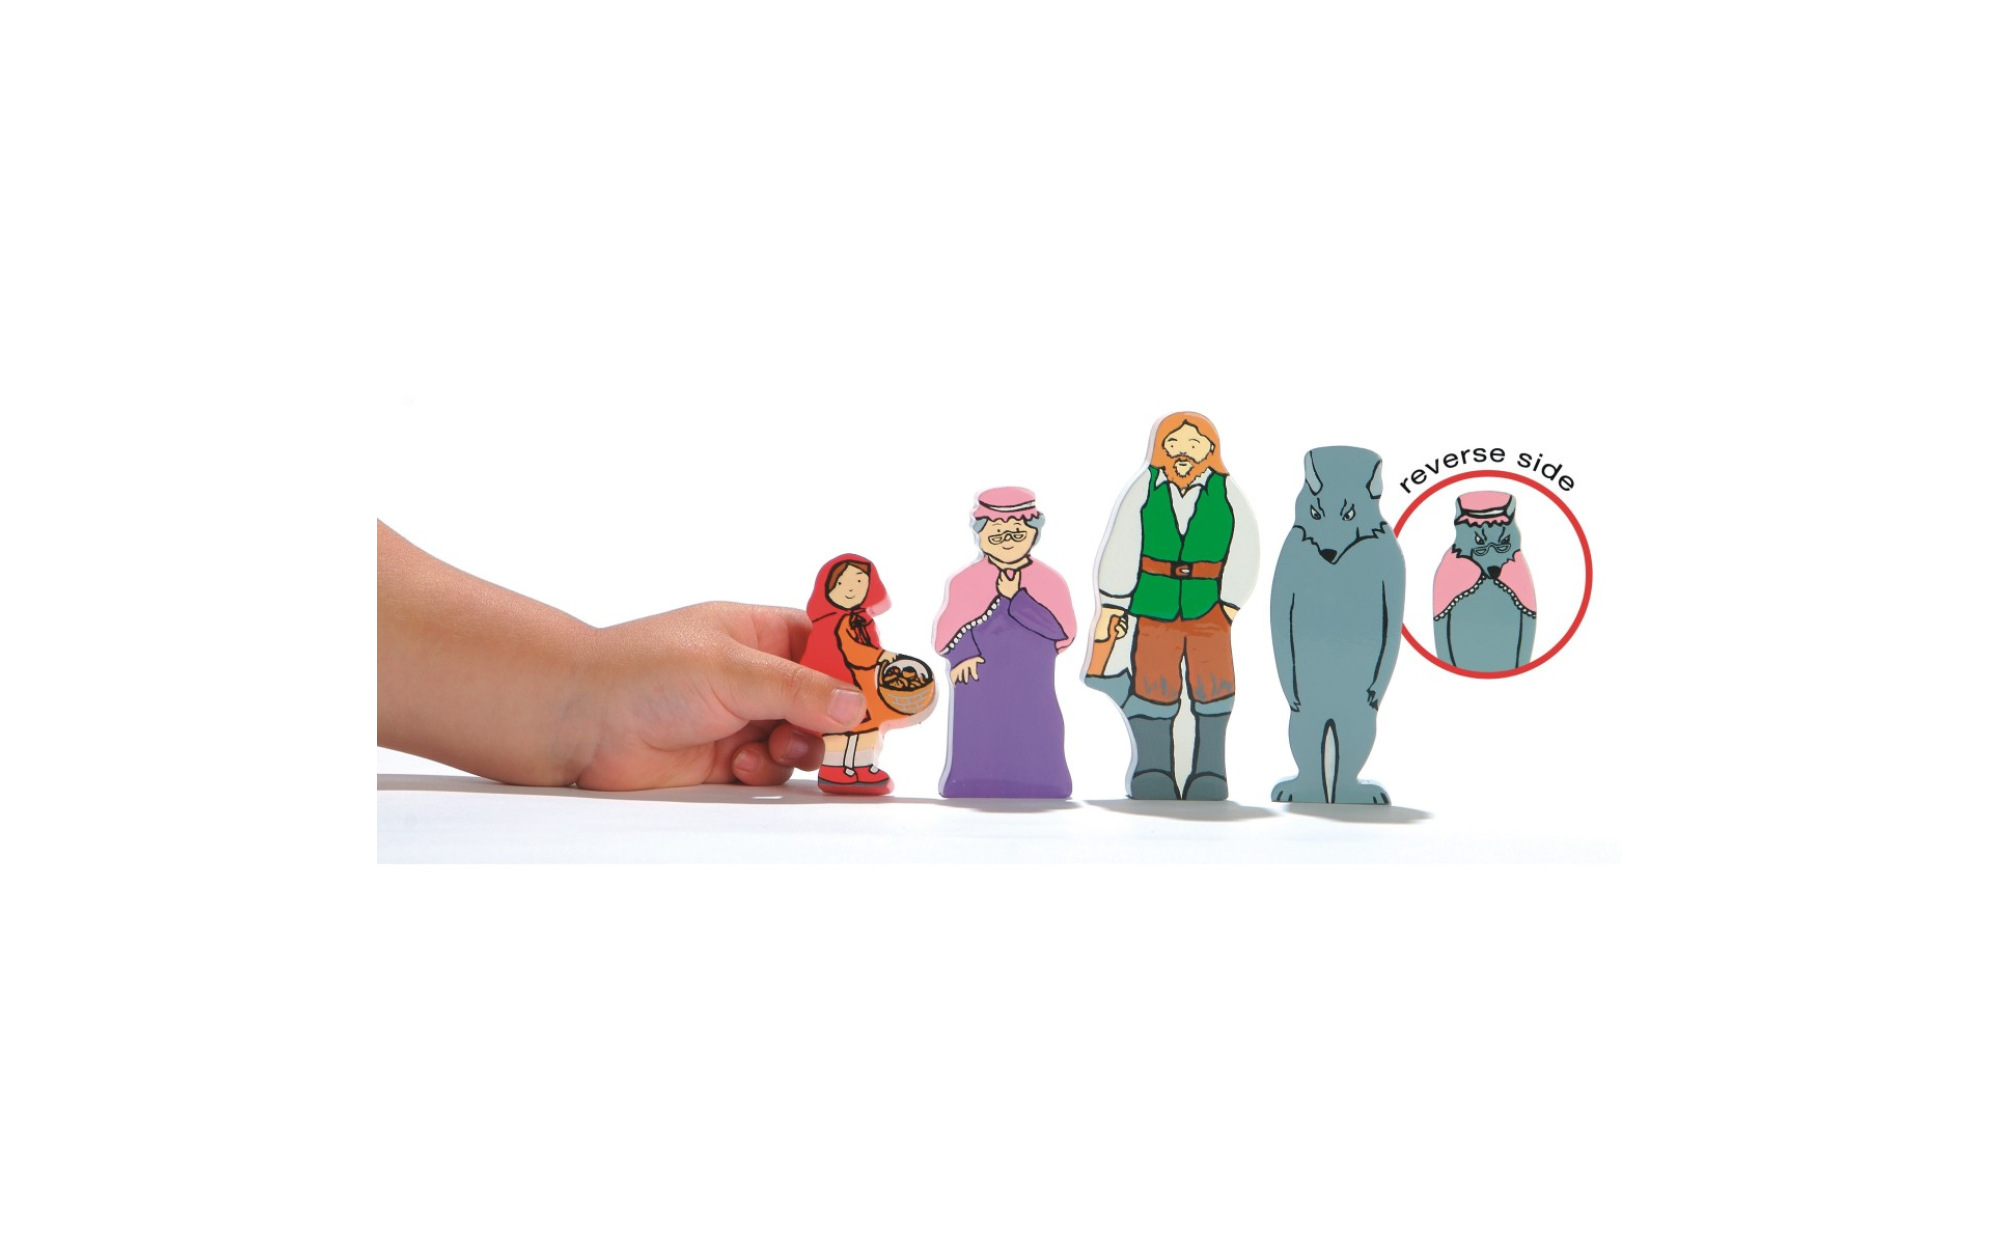 Review: Little Red Riding Hood Fairytale Playdoh Set. - Baby Budgeting